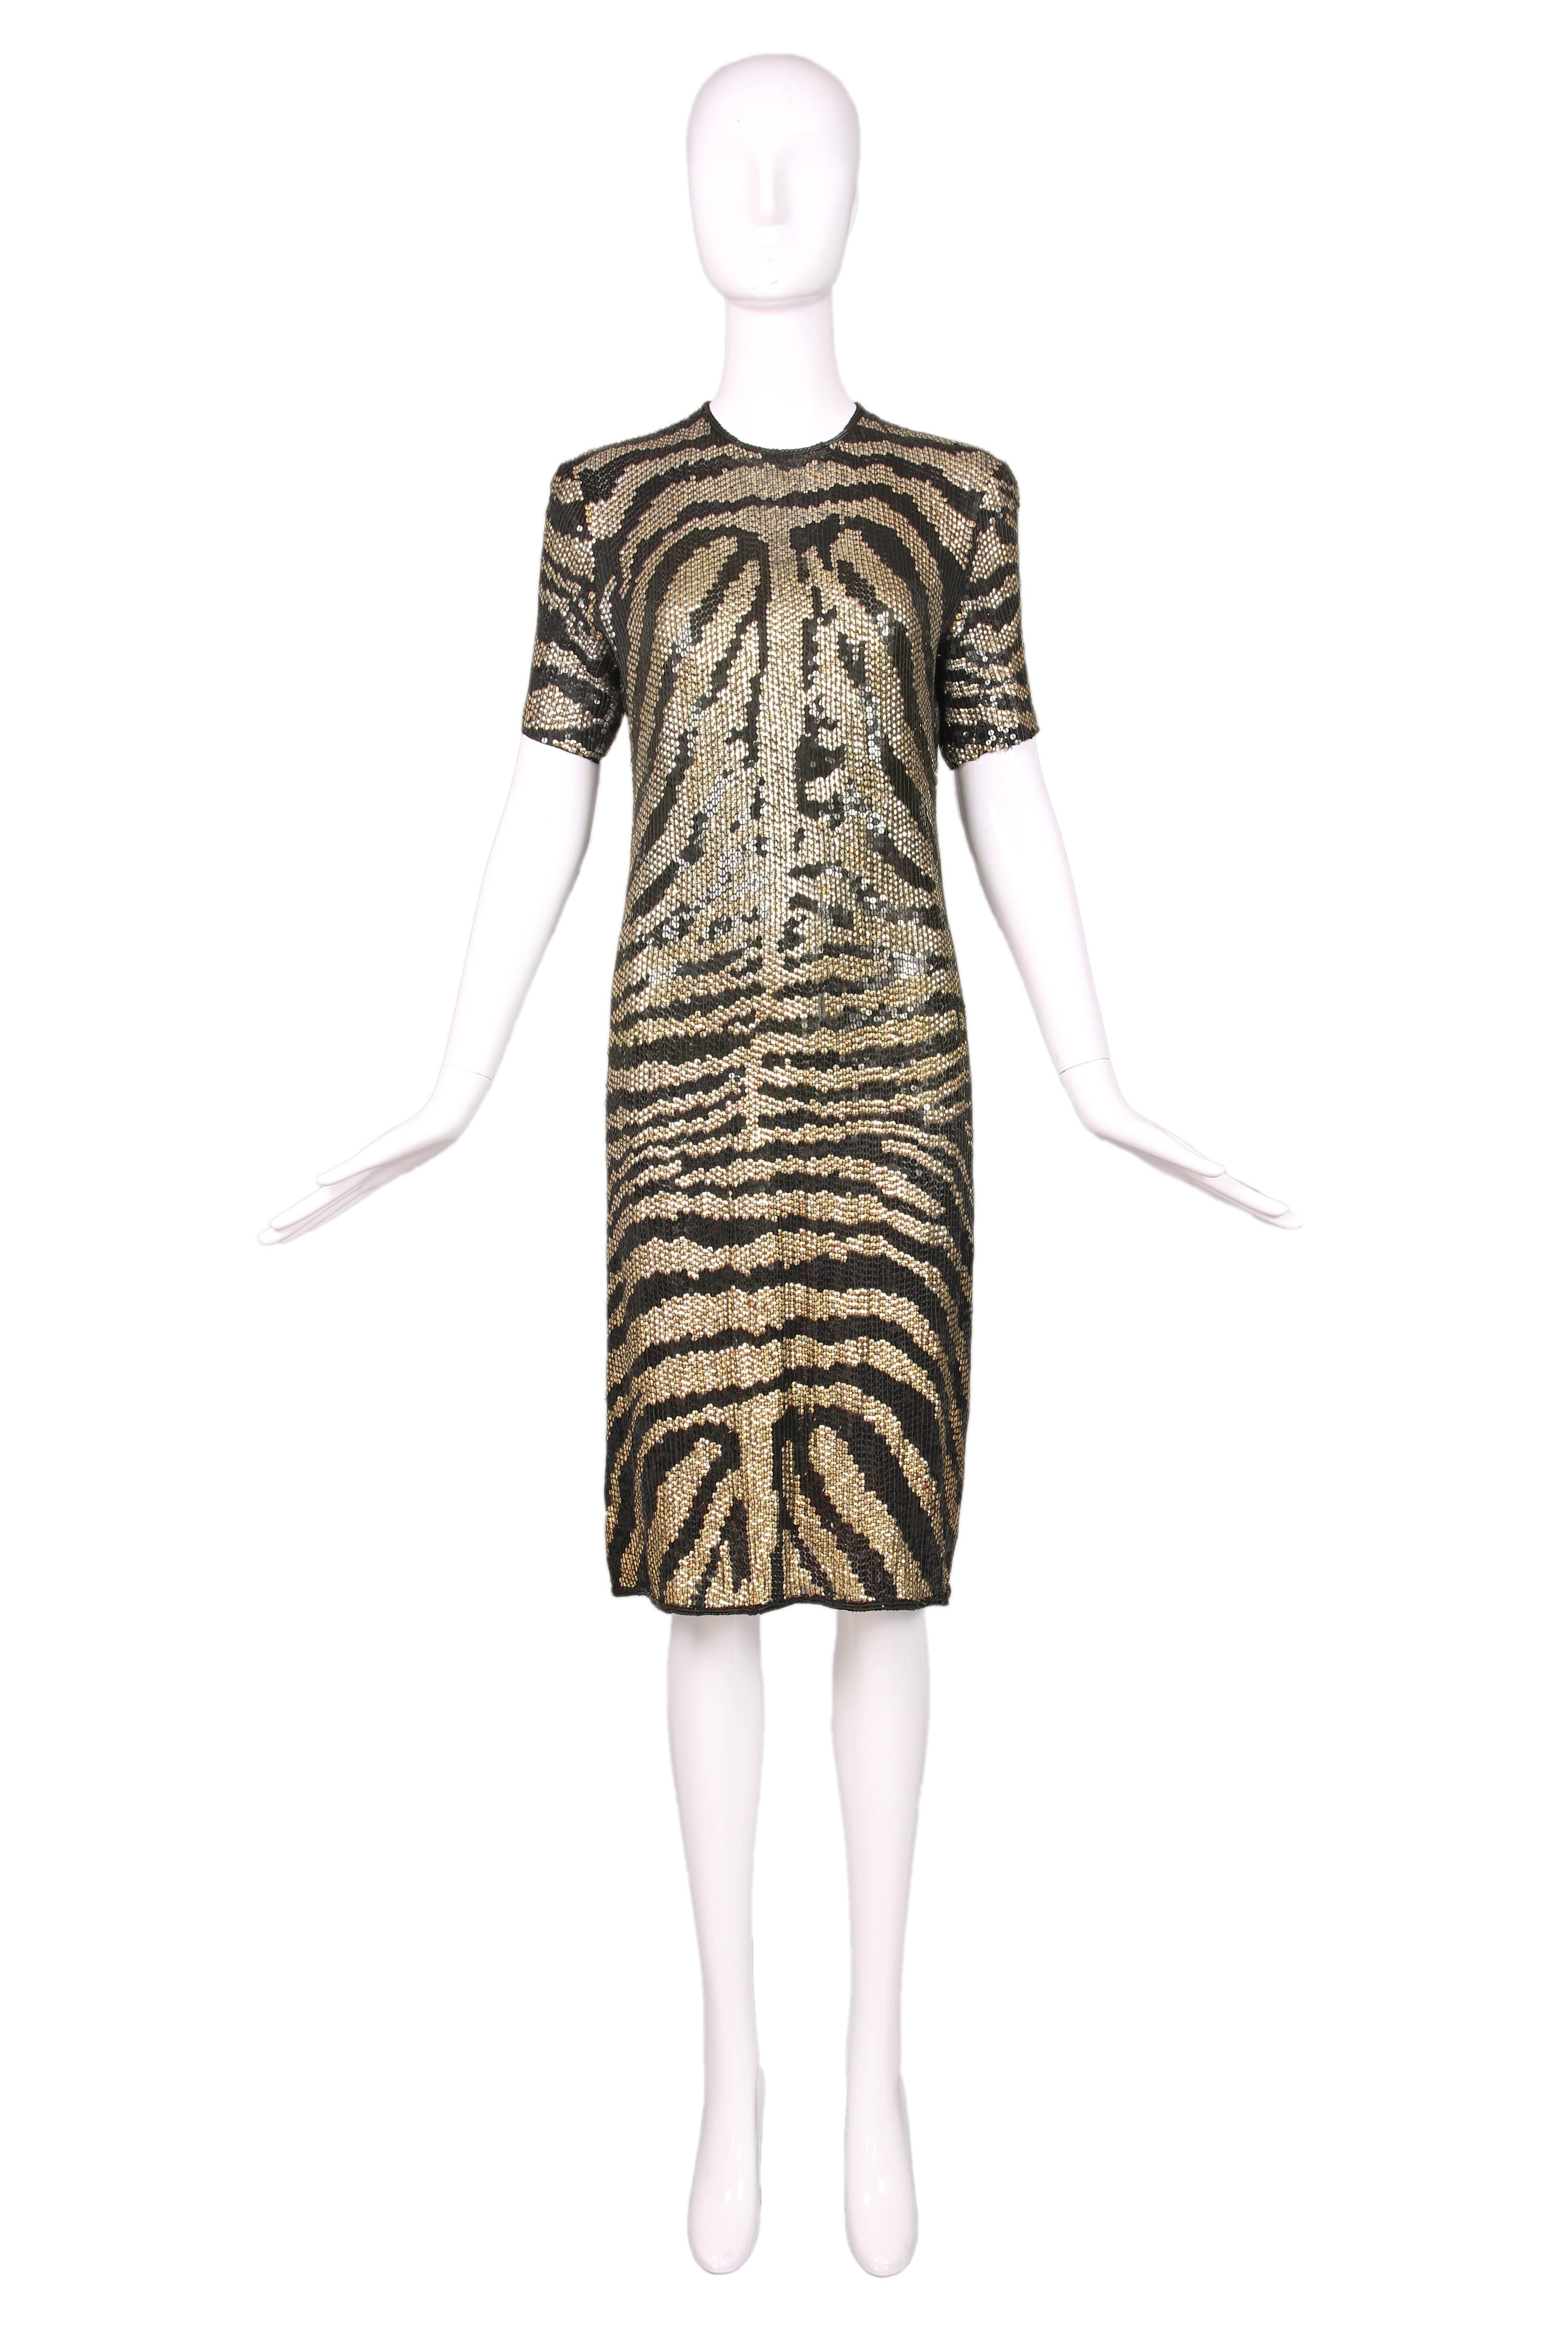 1970's Halston gold & black sequin short sleeved tiger print evening dress. In excellent condition. 
MEASUREMENTS:
Bust - 34